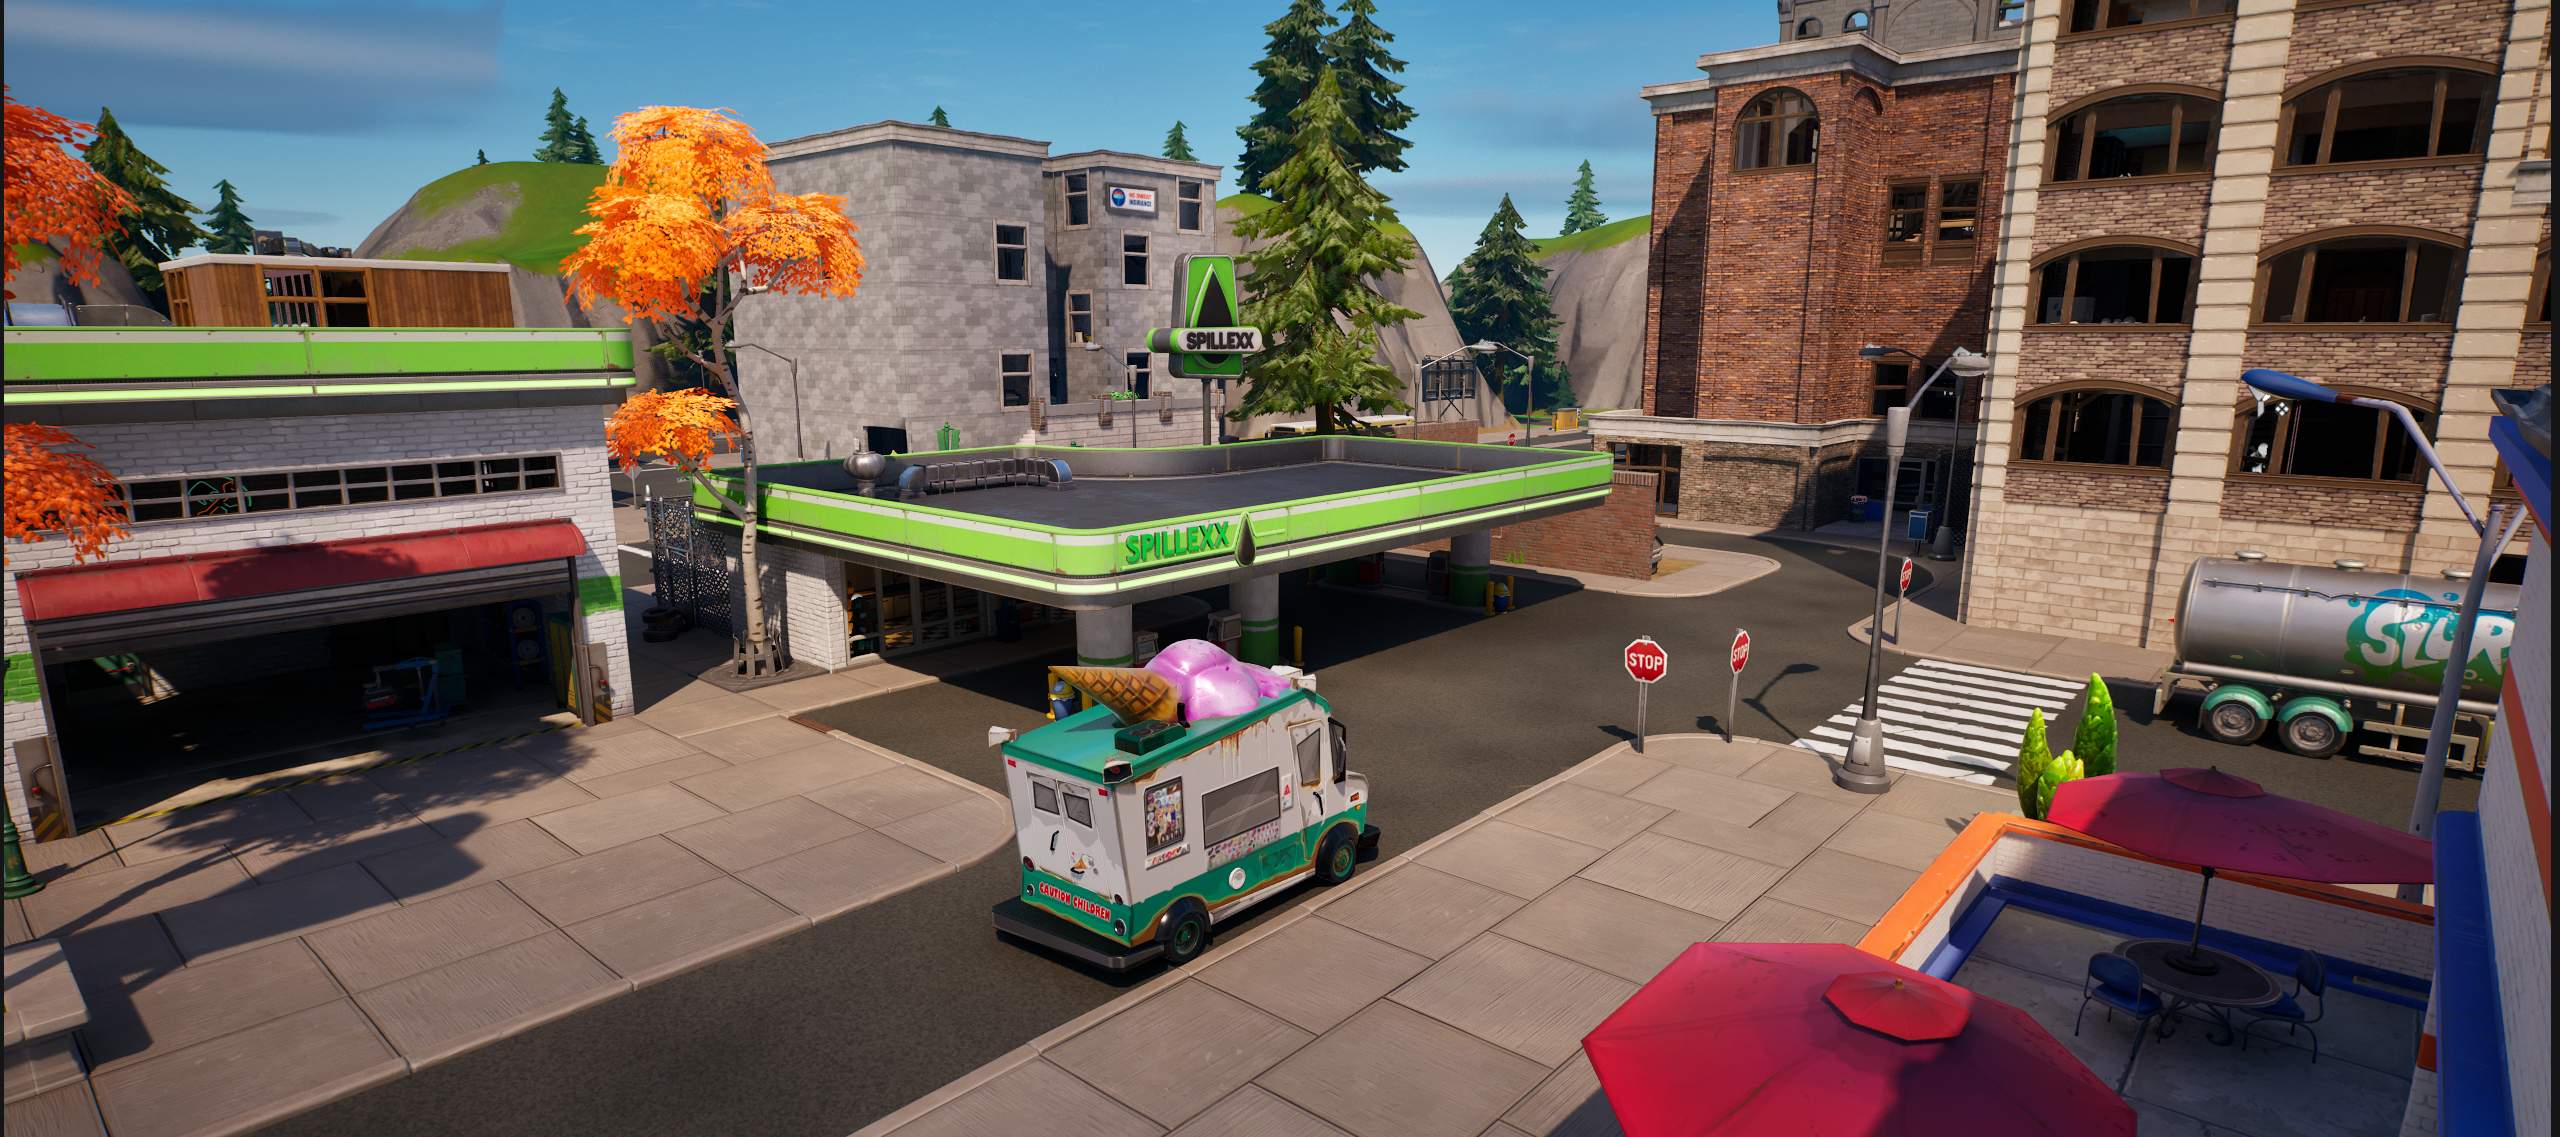 Solo Tilted Zone Wars🏬 image 3